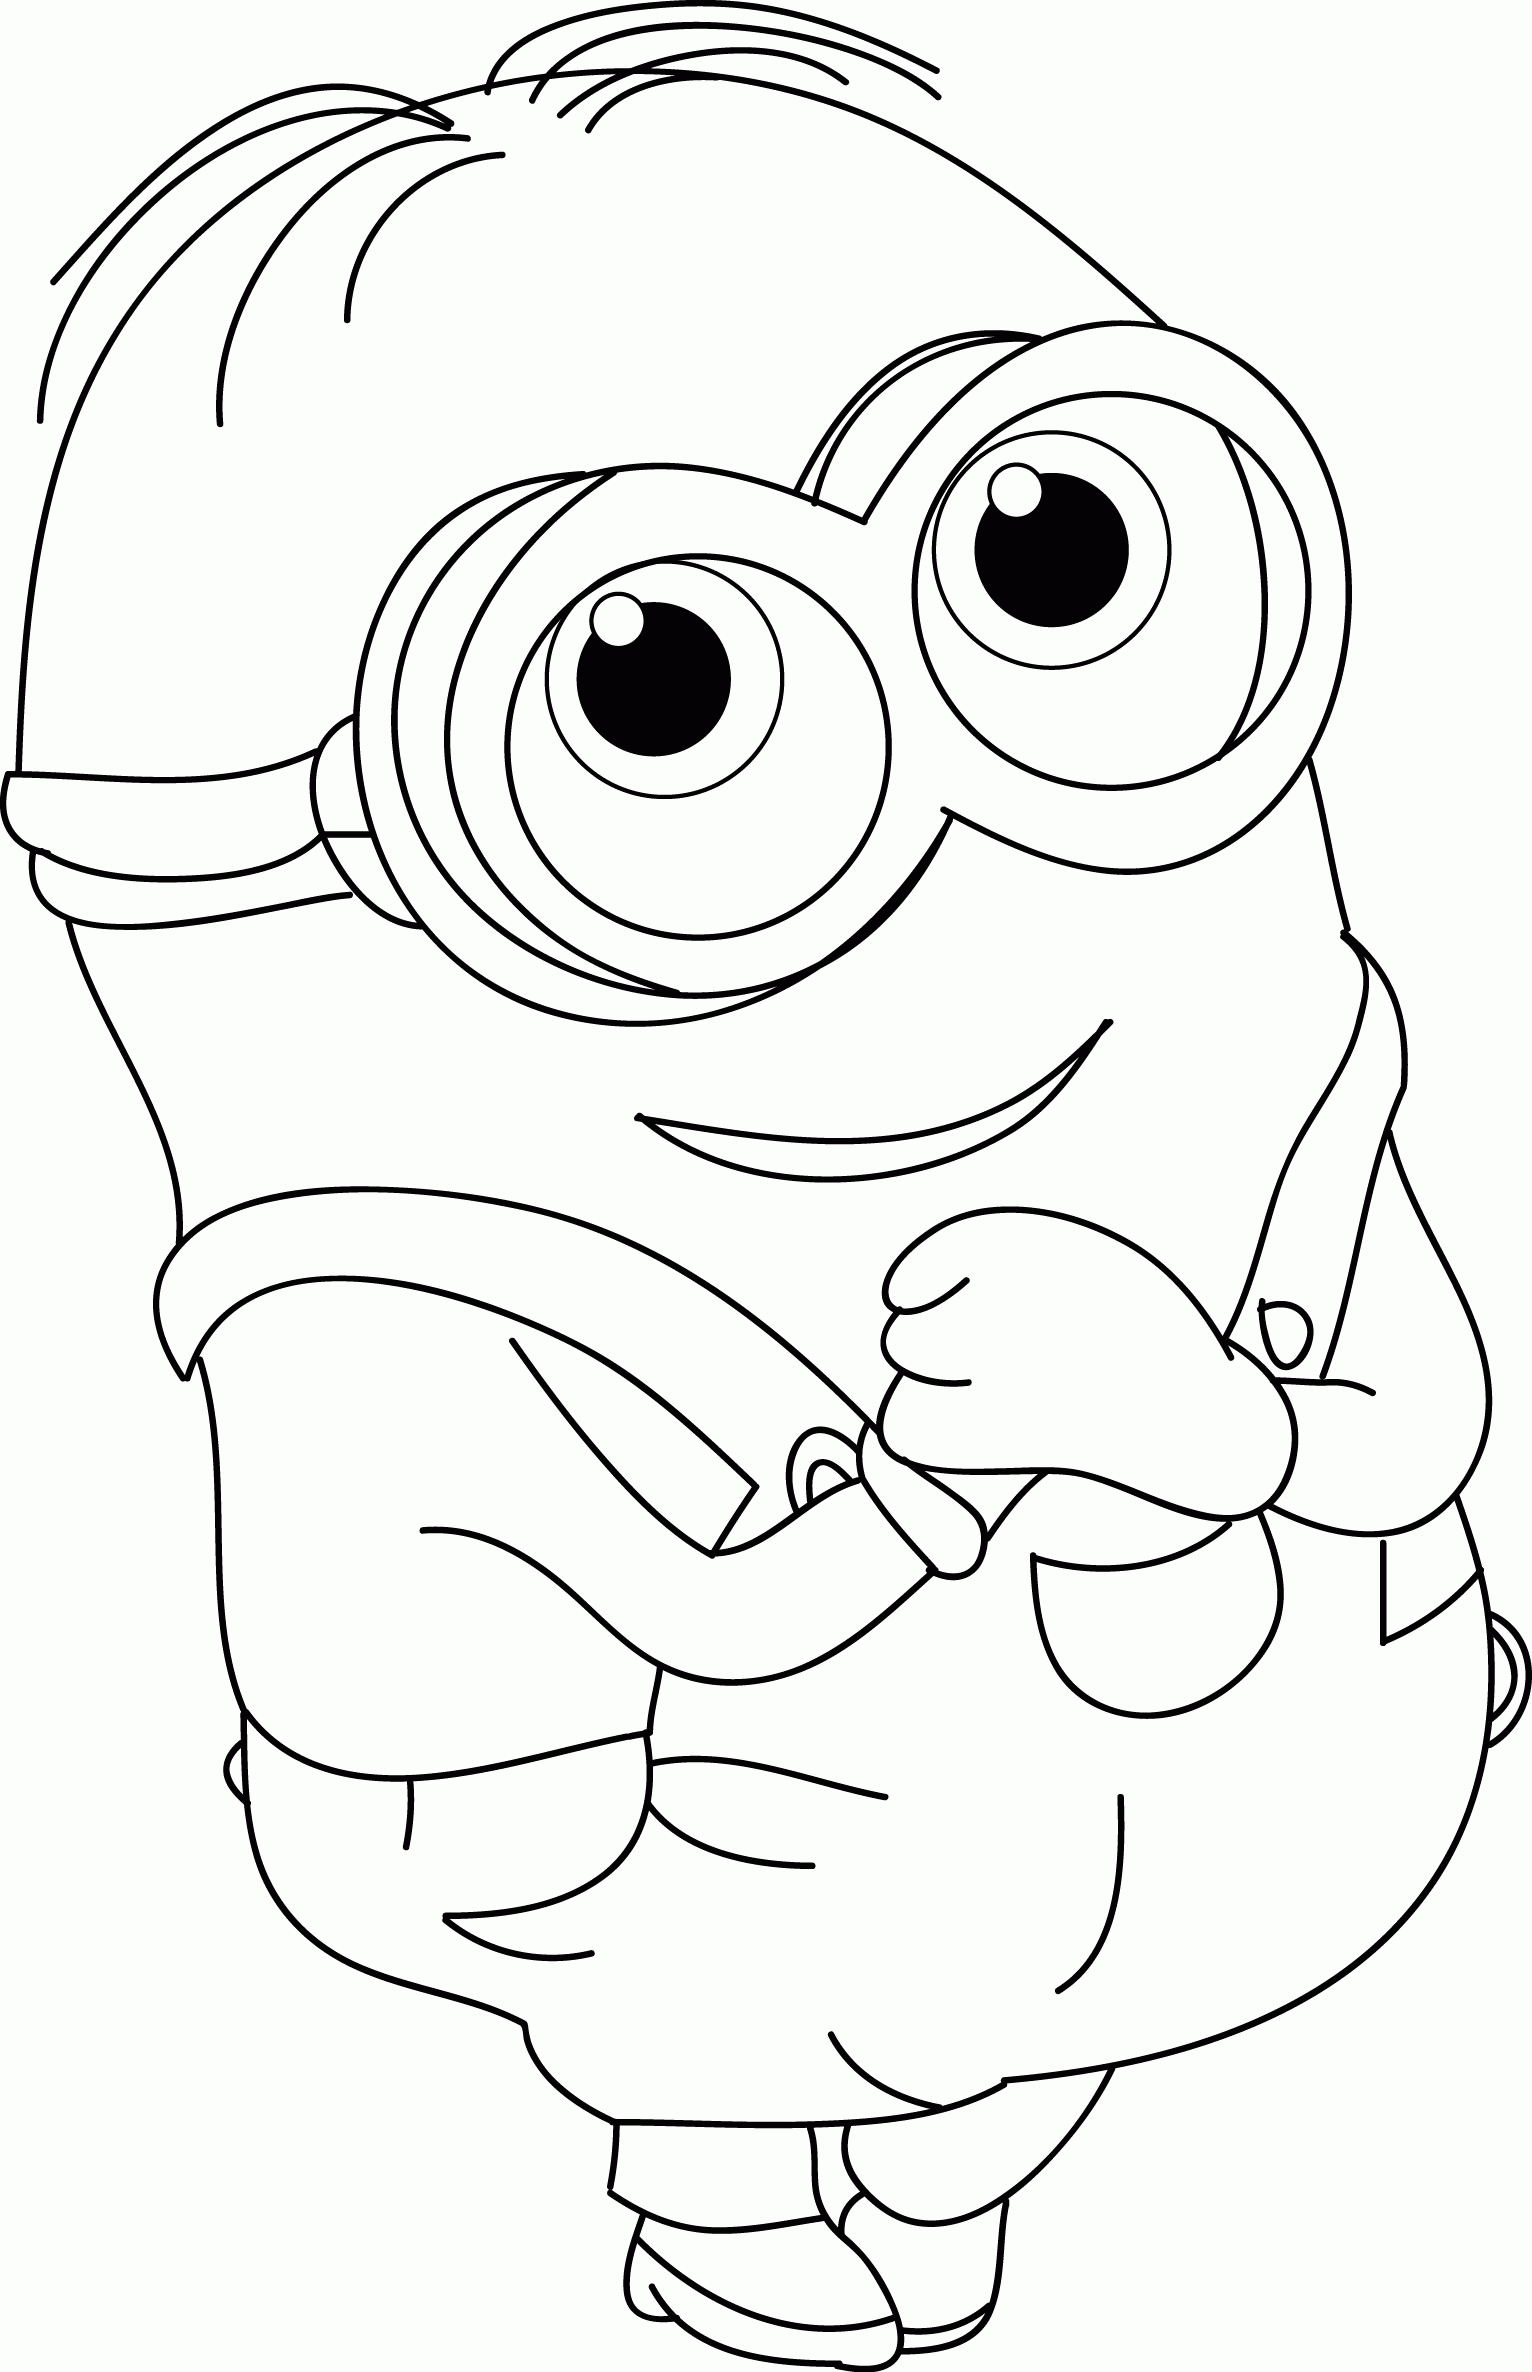 Minion S Very Cute Coloring Page | Wecoloringpage